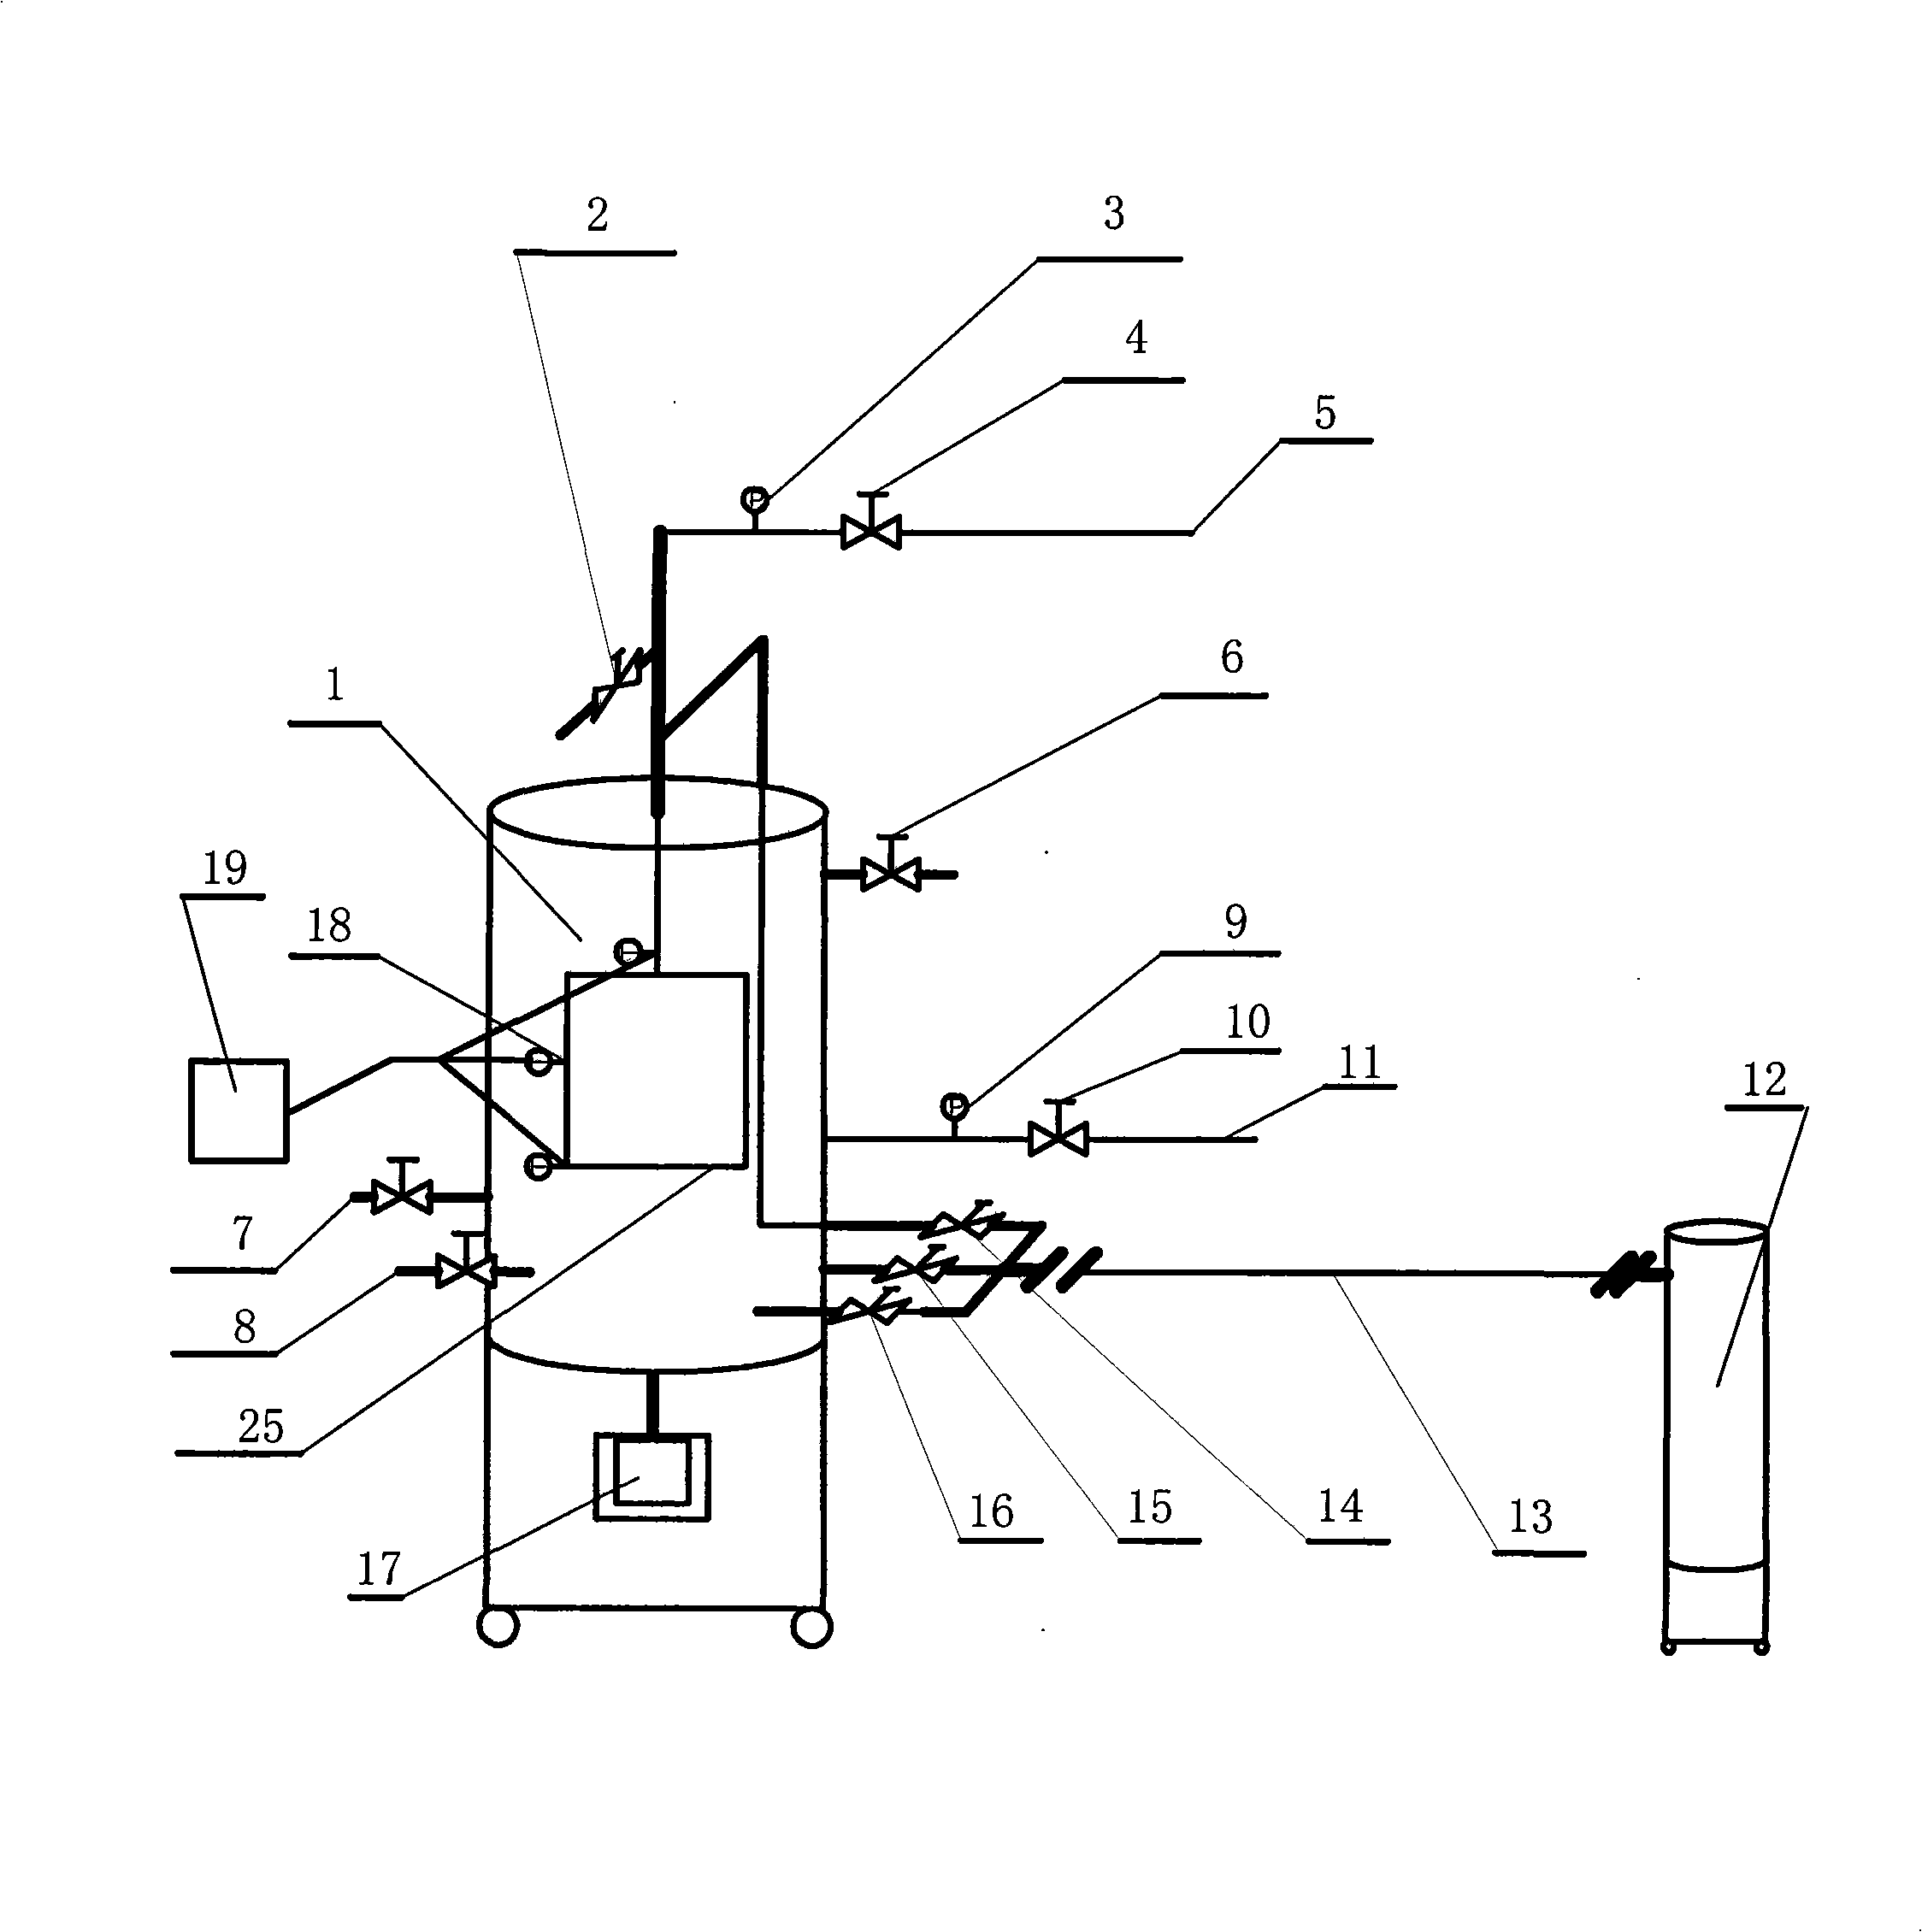 Rarefaction air condensing trapping device with liquid nitrogen suction refrigeration